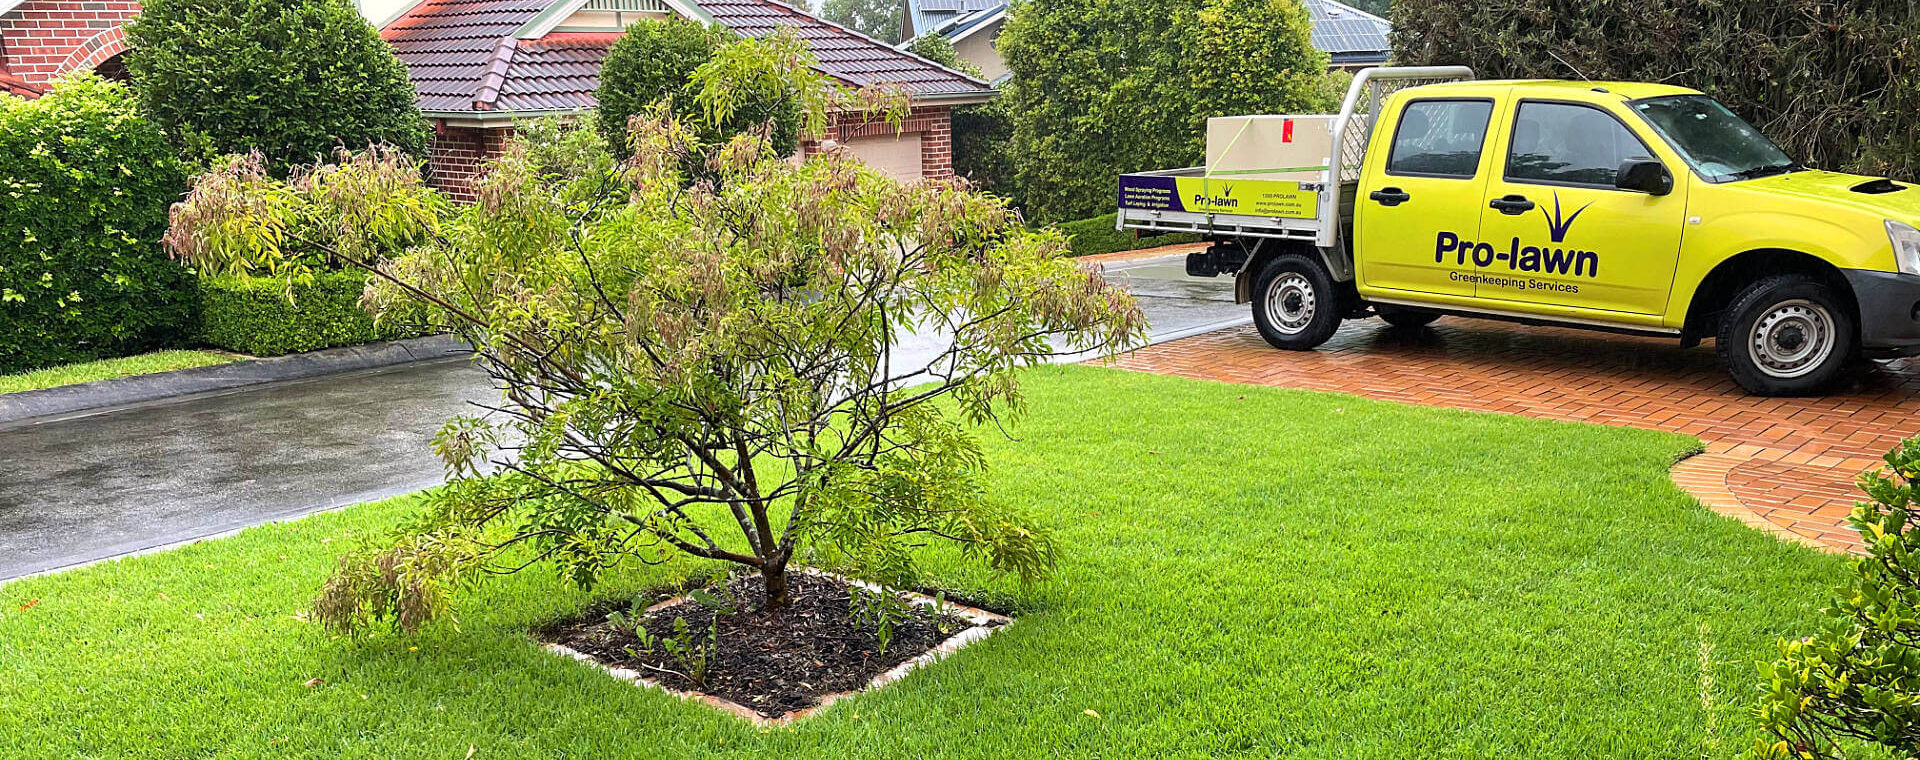 Lawn Care Professionals in <span>the Ryde/Epping area</span>